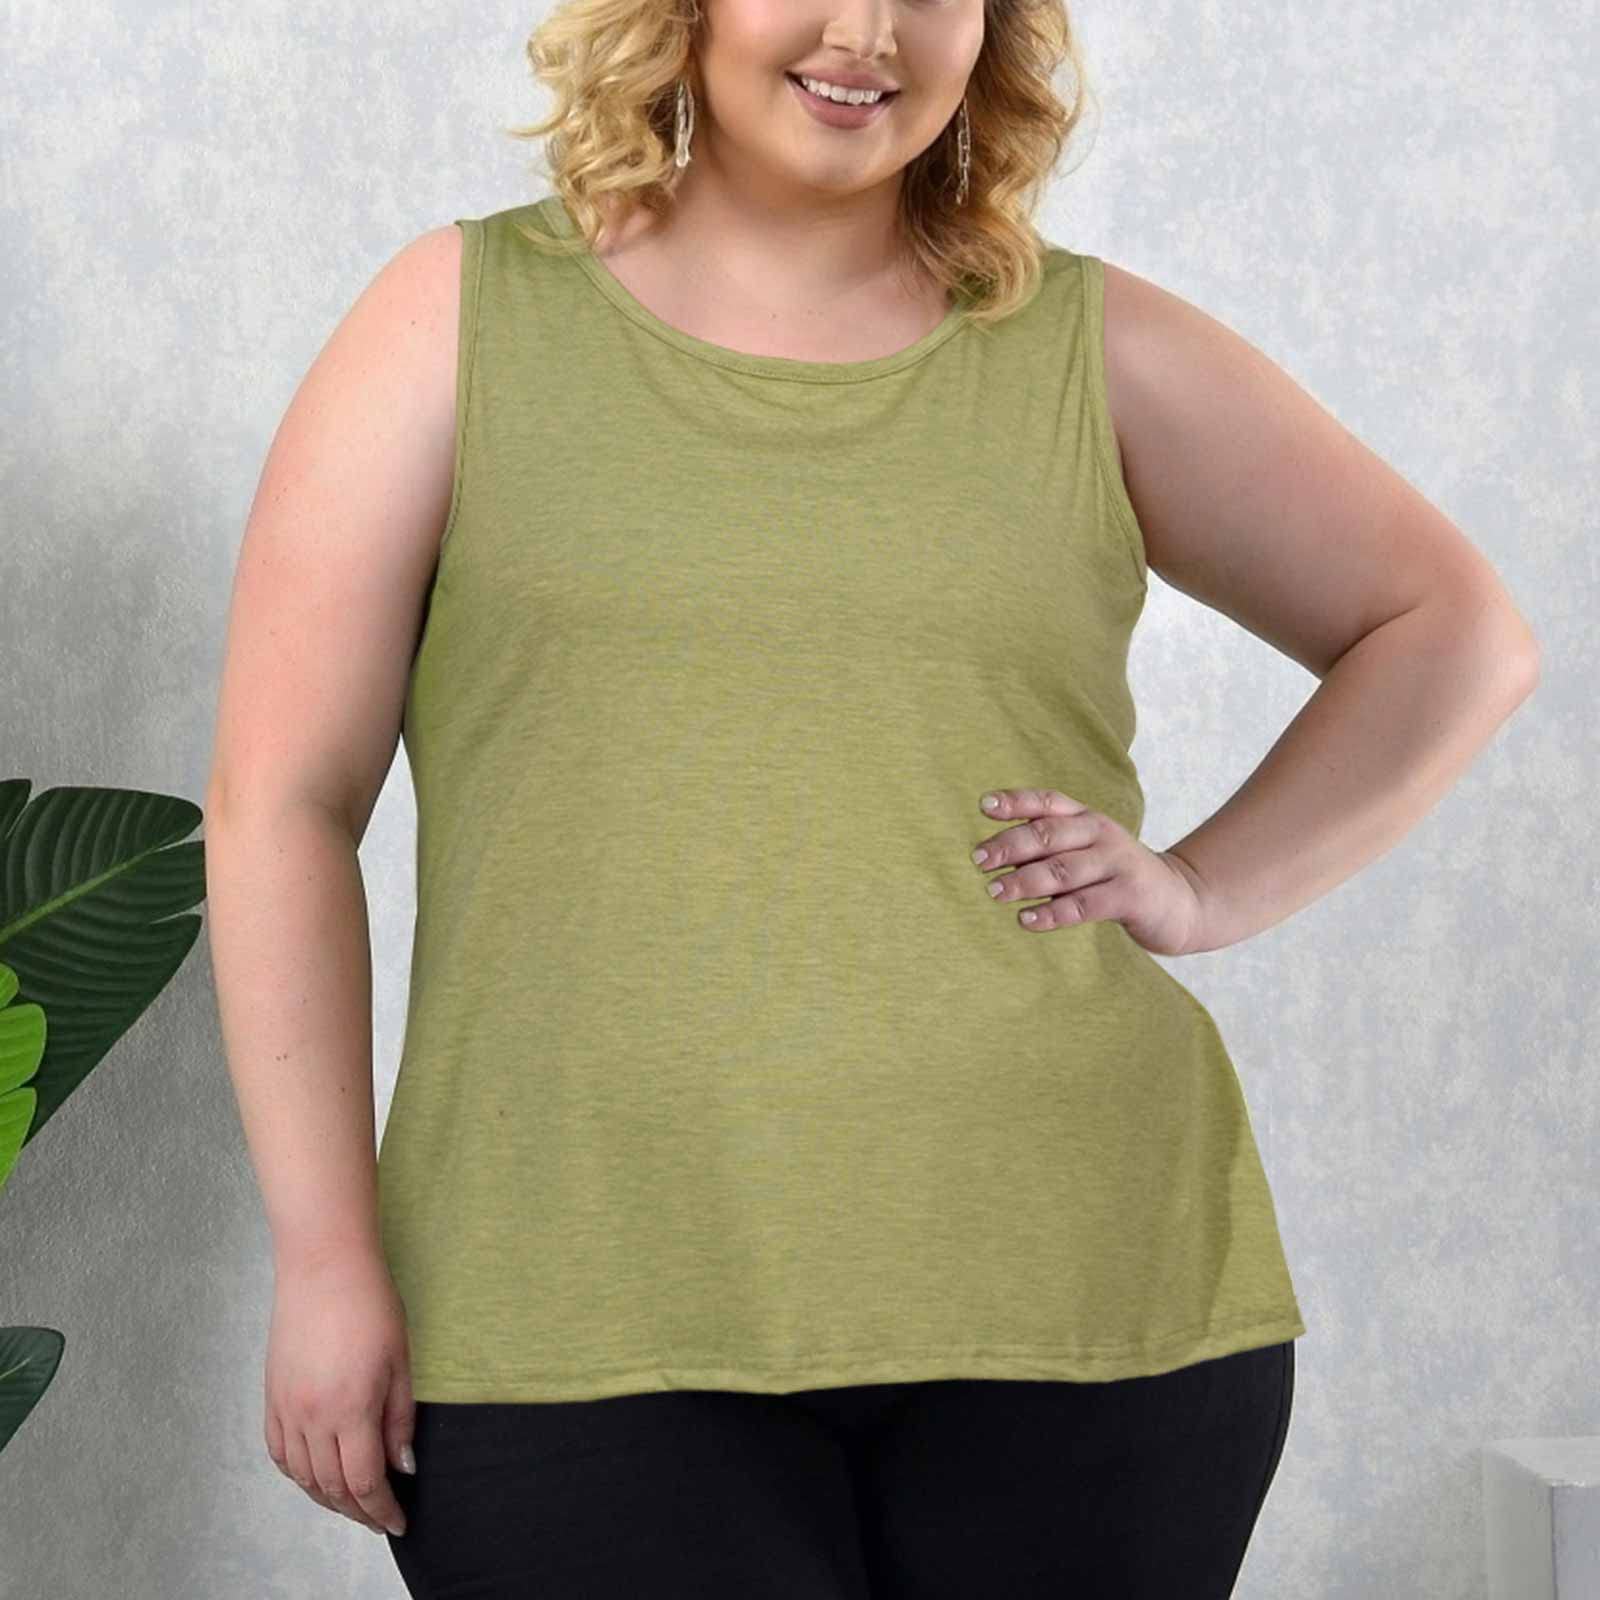 Plus Size Tank Tops for Women Summer Sleeveless T-Shirts Loose-Green - Moon Wood